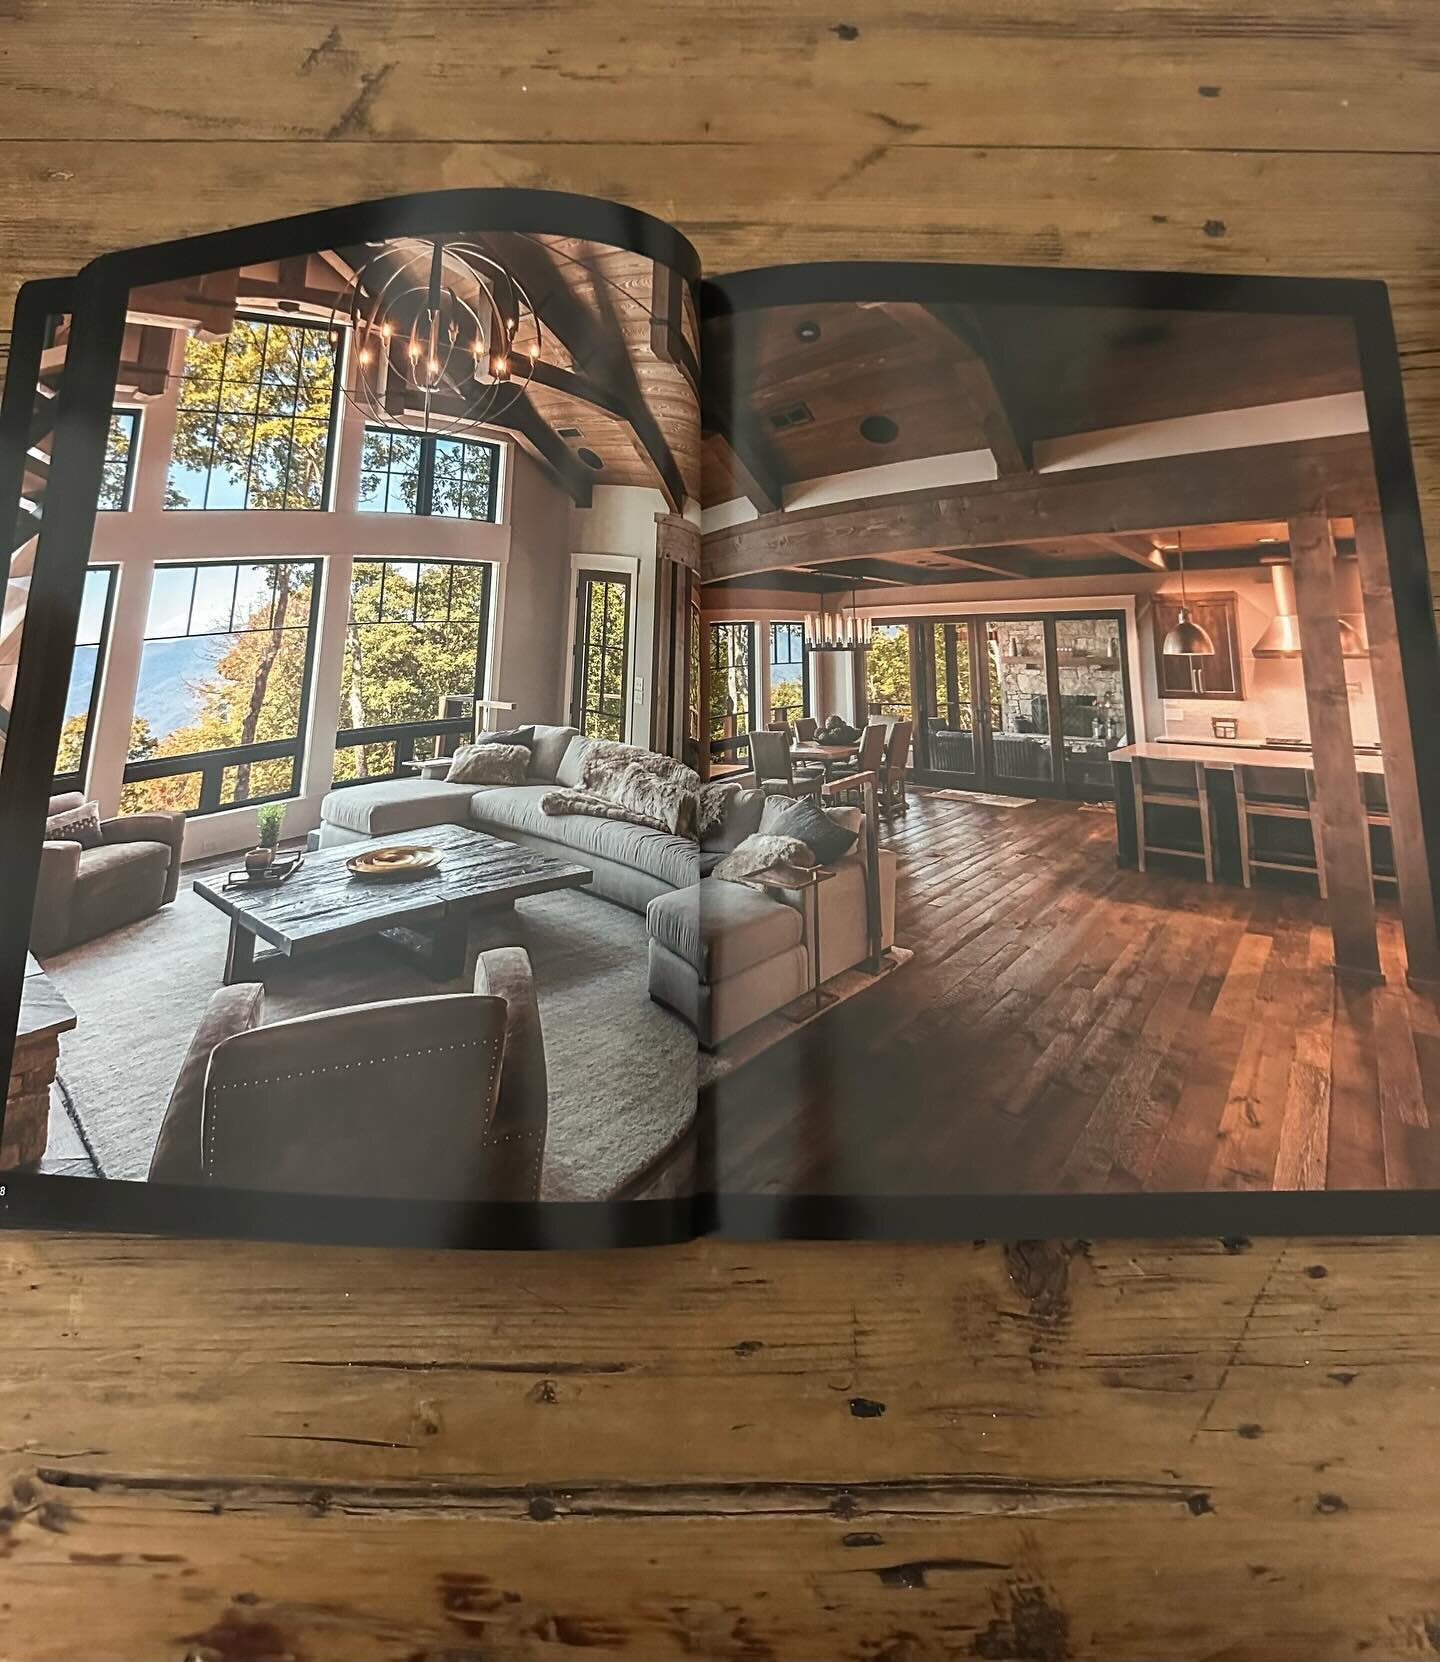 Thank you @realhardwoodfloors for featuring not one but two of the homes we did together @balsammountainpreserve and @grandhighlandswnc.  Your flooring is always a work of art and the foundation of a beautiful home! @augustinteriors @shamburgerarchit